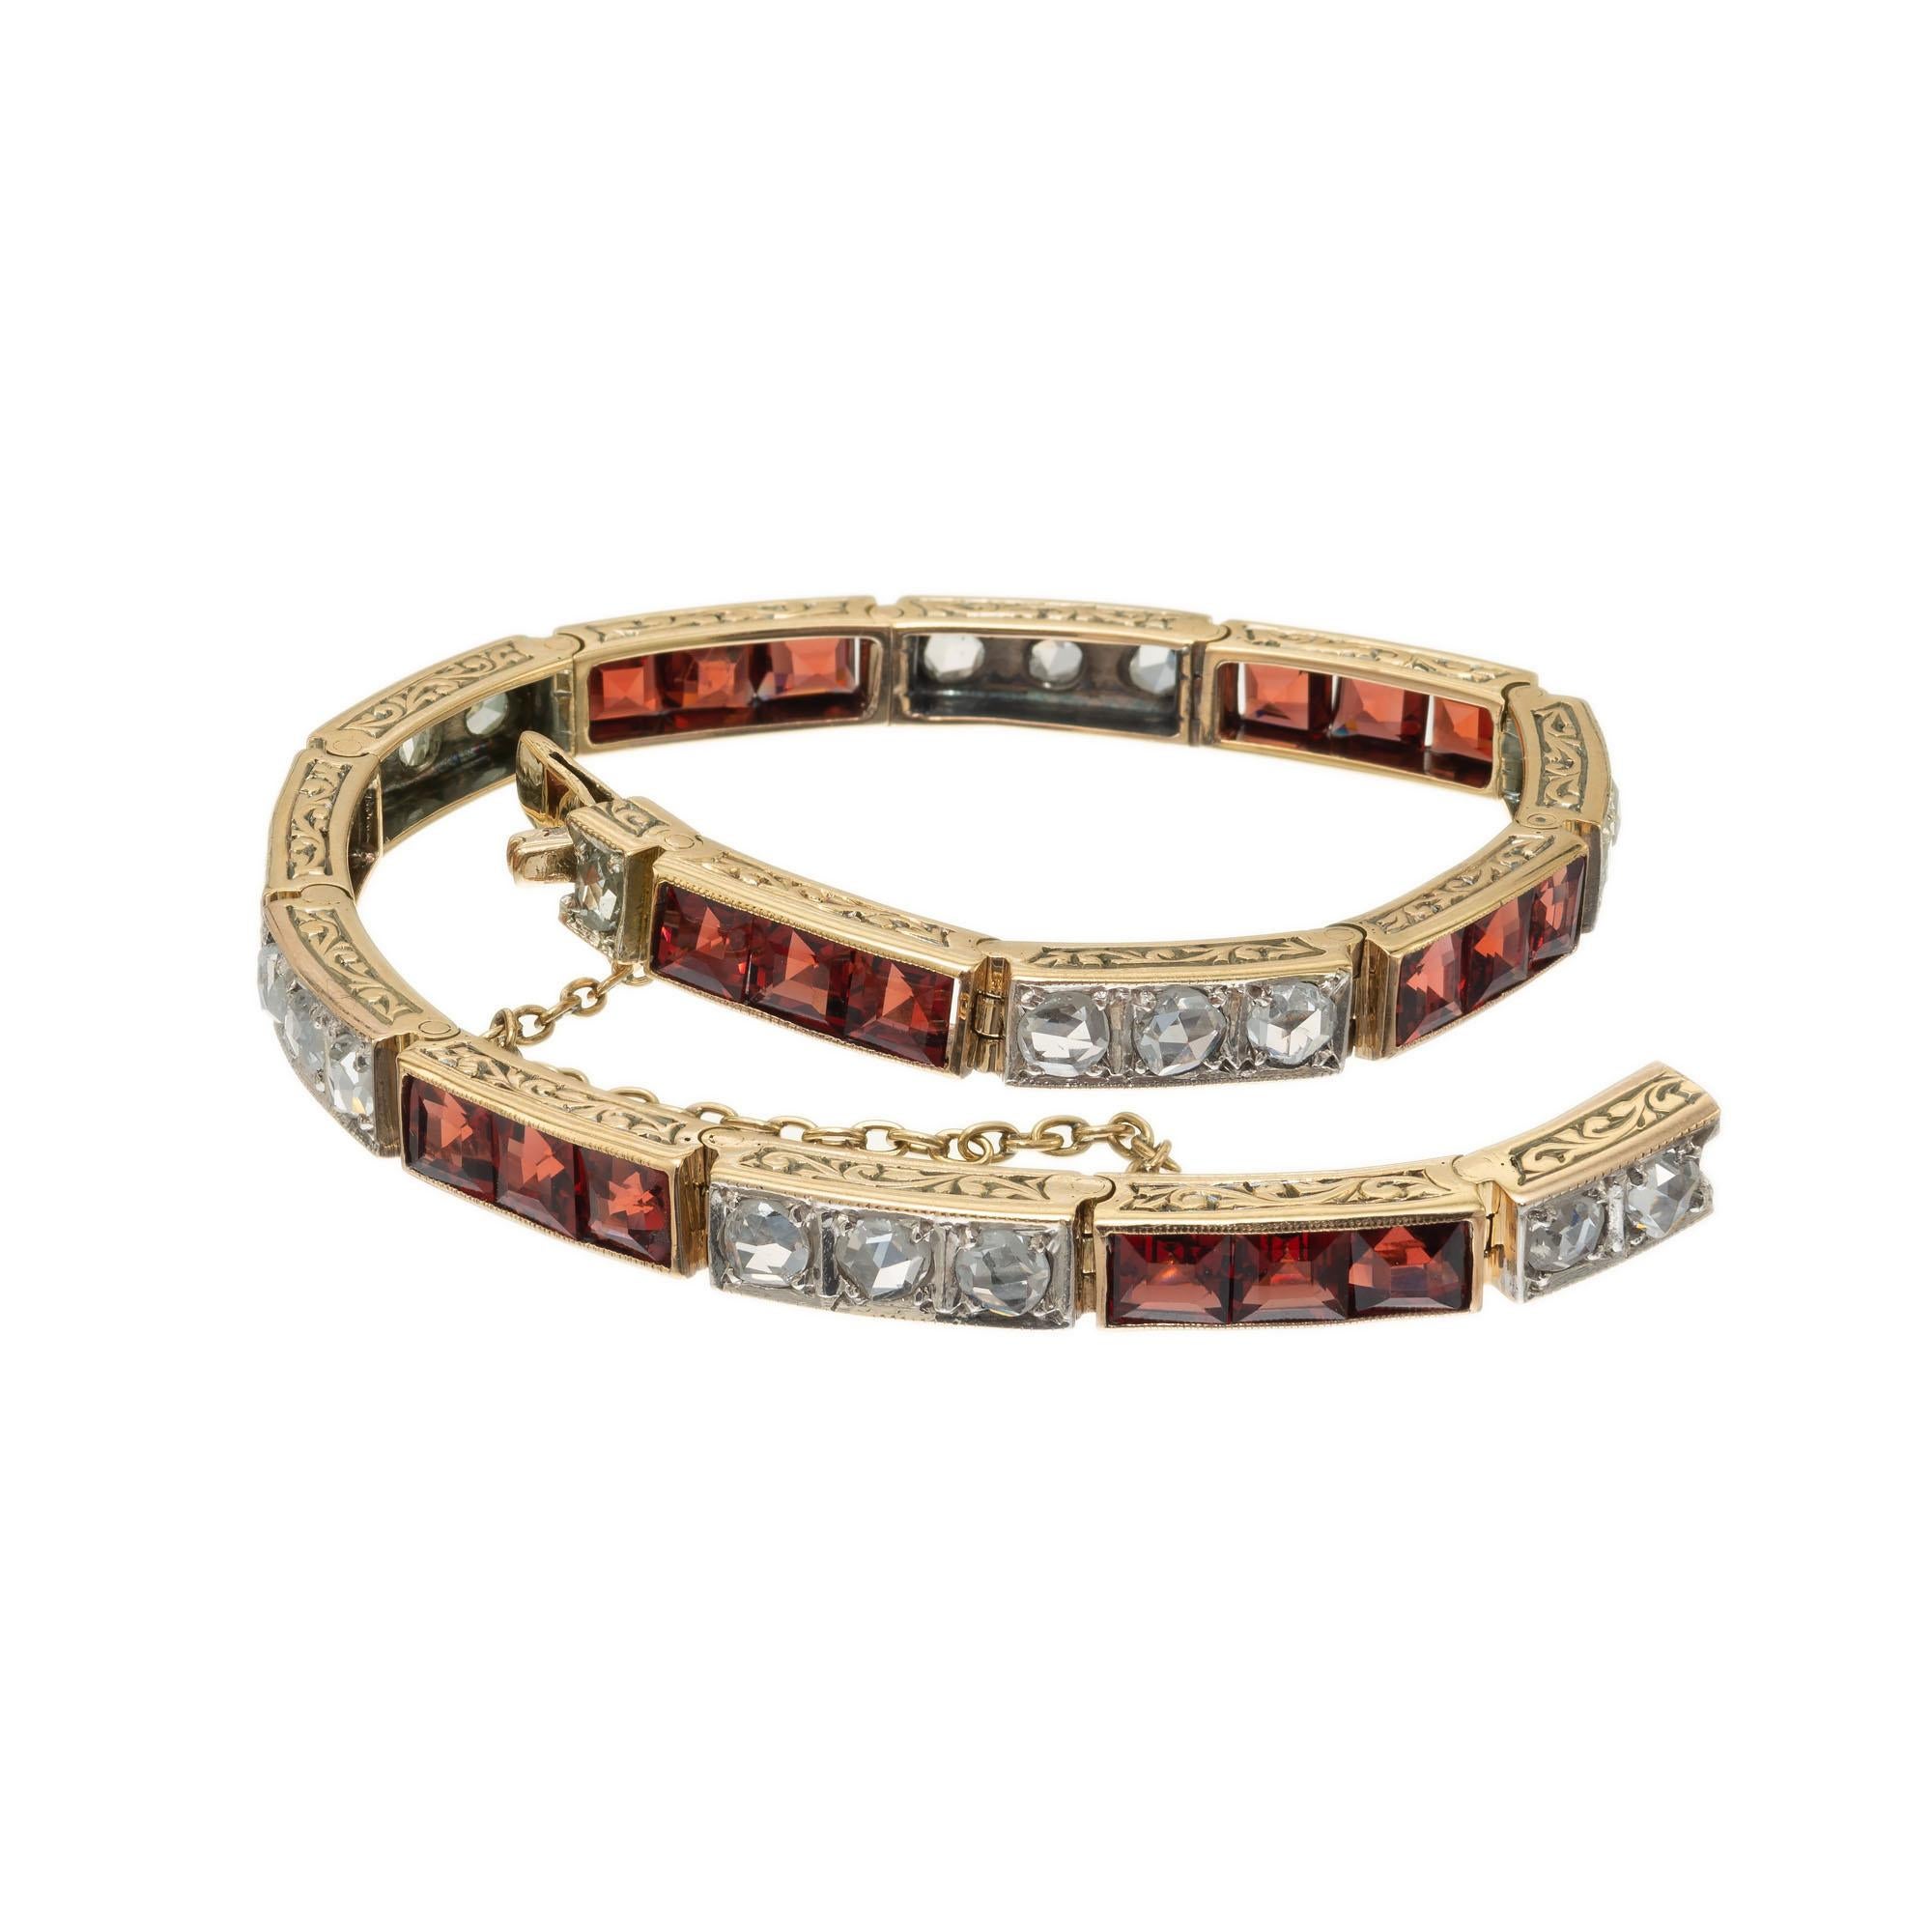 Garnet and diamond hinged link line bracelet with engraved sides. Set with 1.30 carats of rose cut diamonds and 3.75 carats of square cut garnets in 14k yellow gold.  Built in catch and safety chain. 6.5 inches in length. 

20 rose cut diamonds, H-I